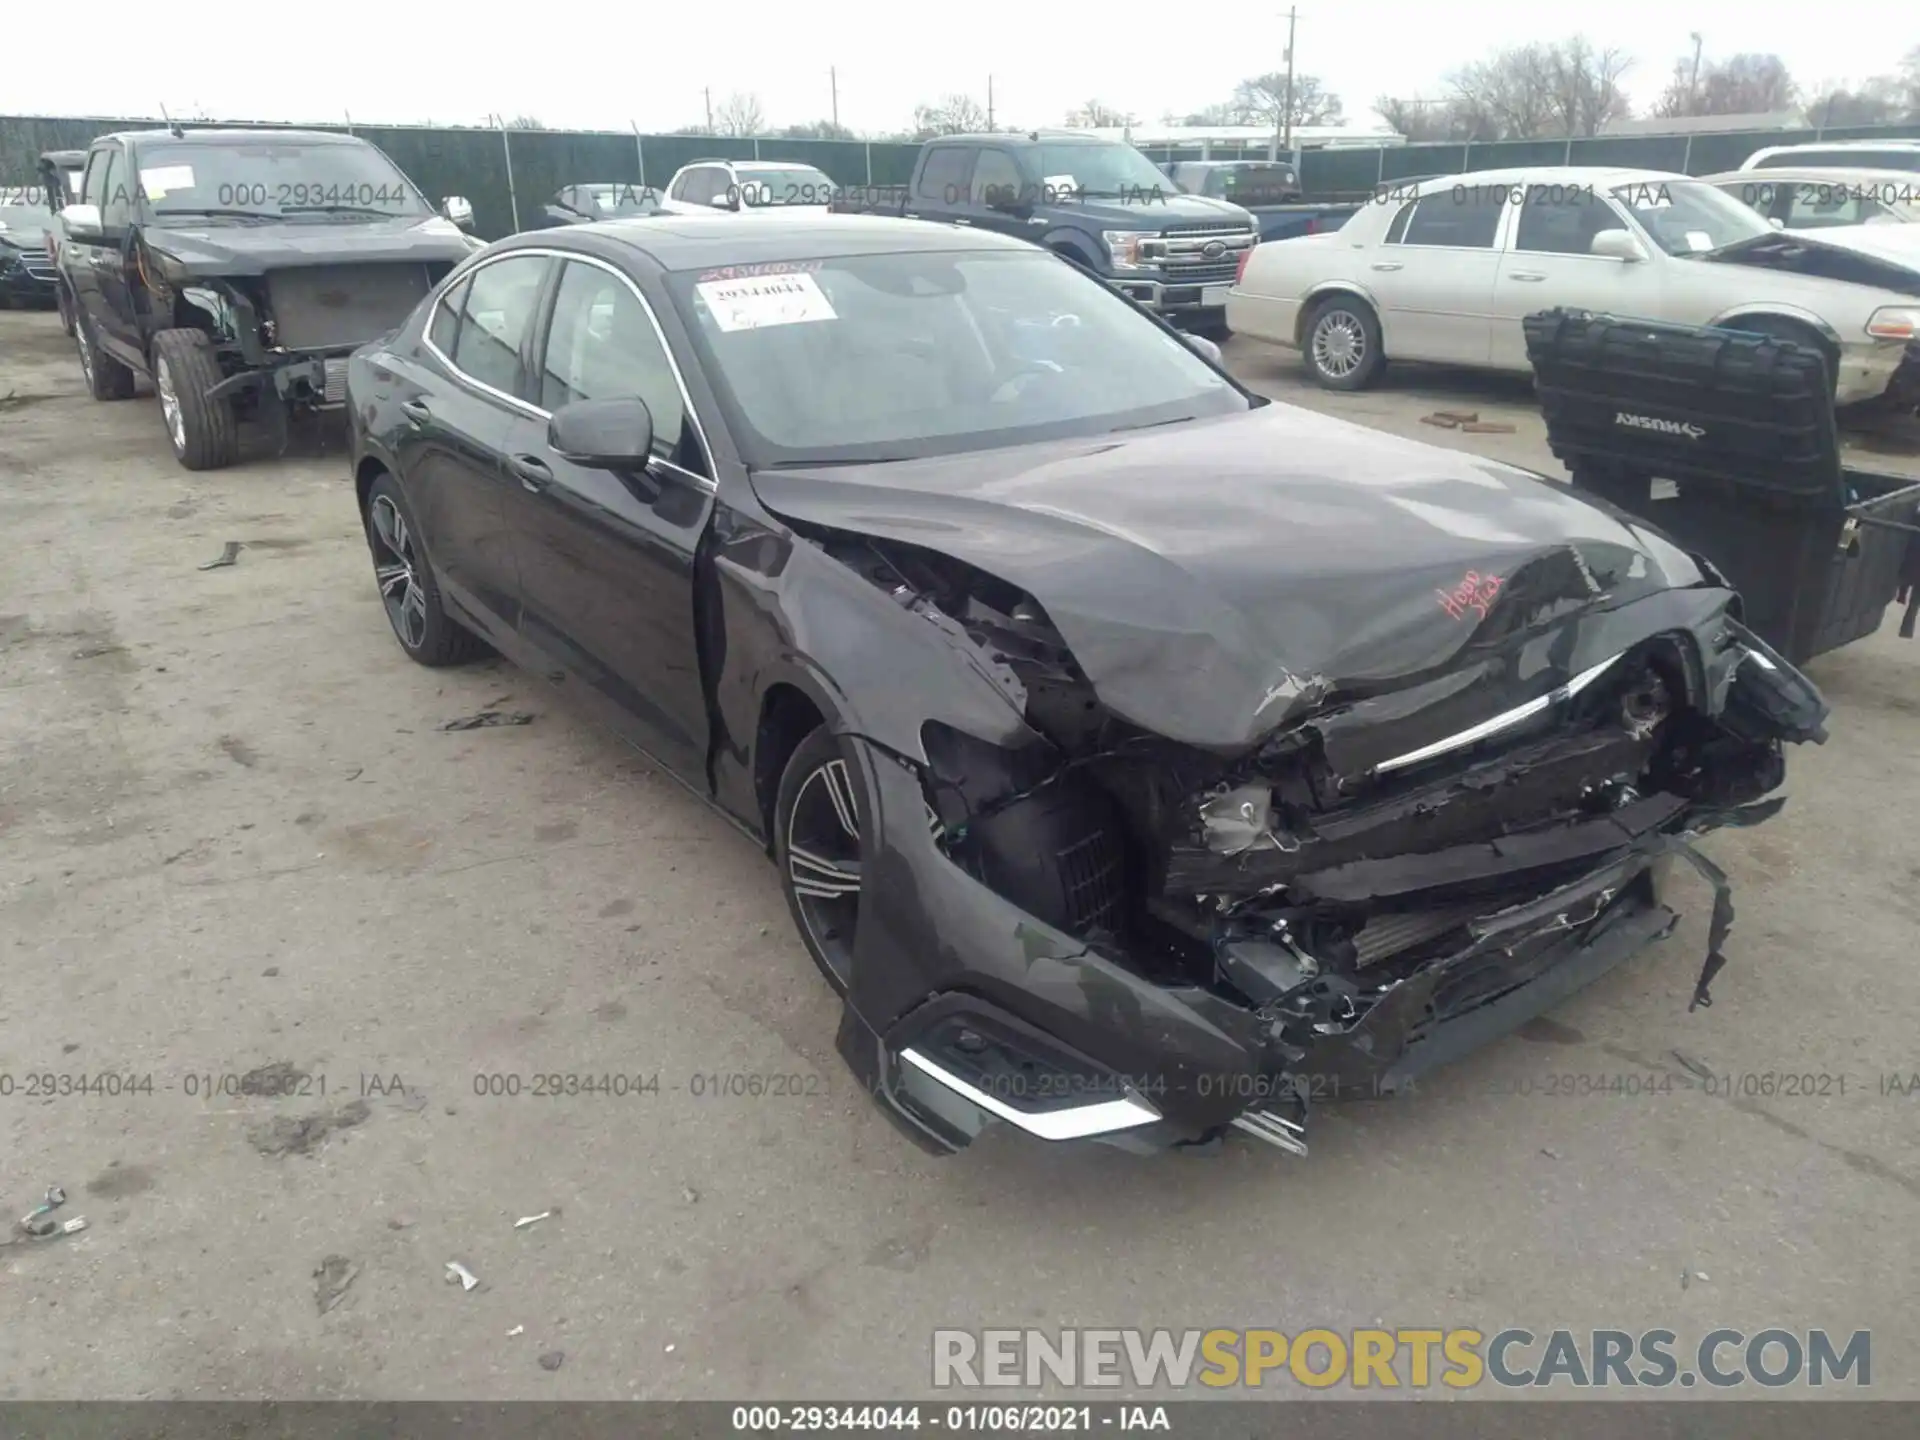 1 Photograph of a damaged car 7JRA22TL2MG081677 VOLVO S60 2021